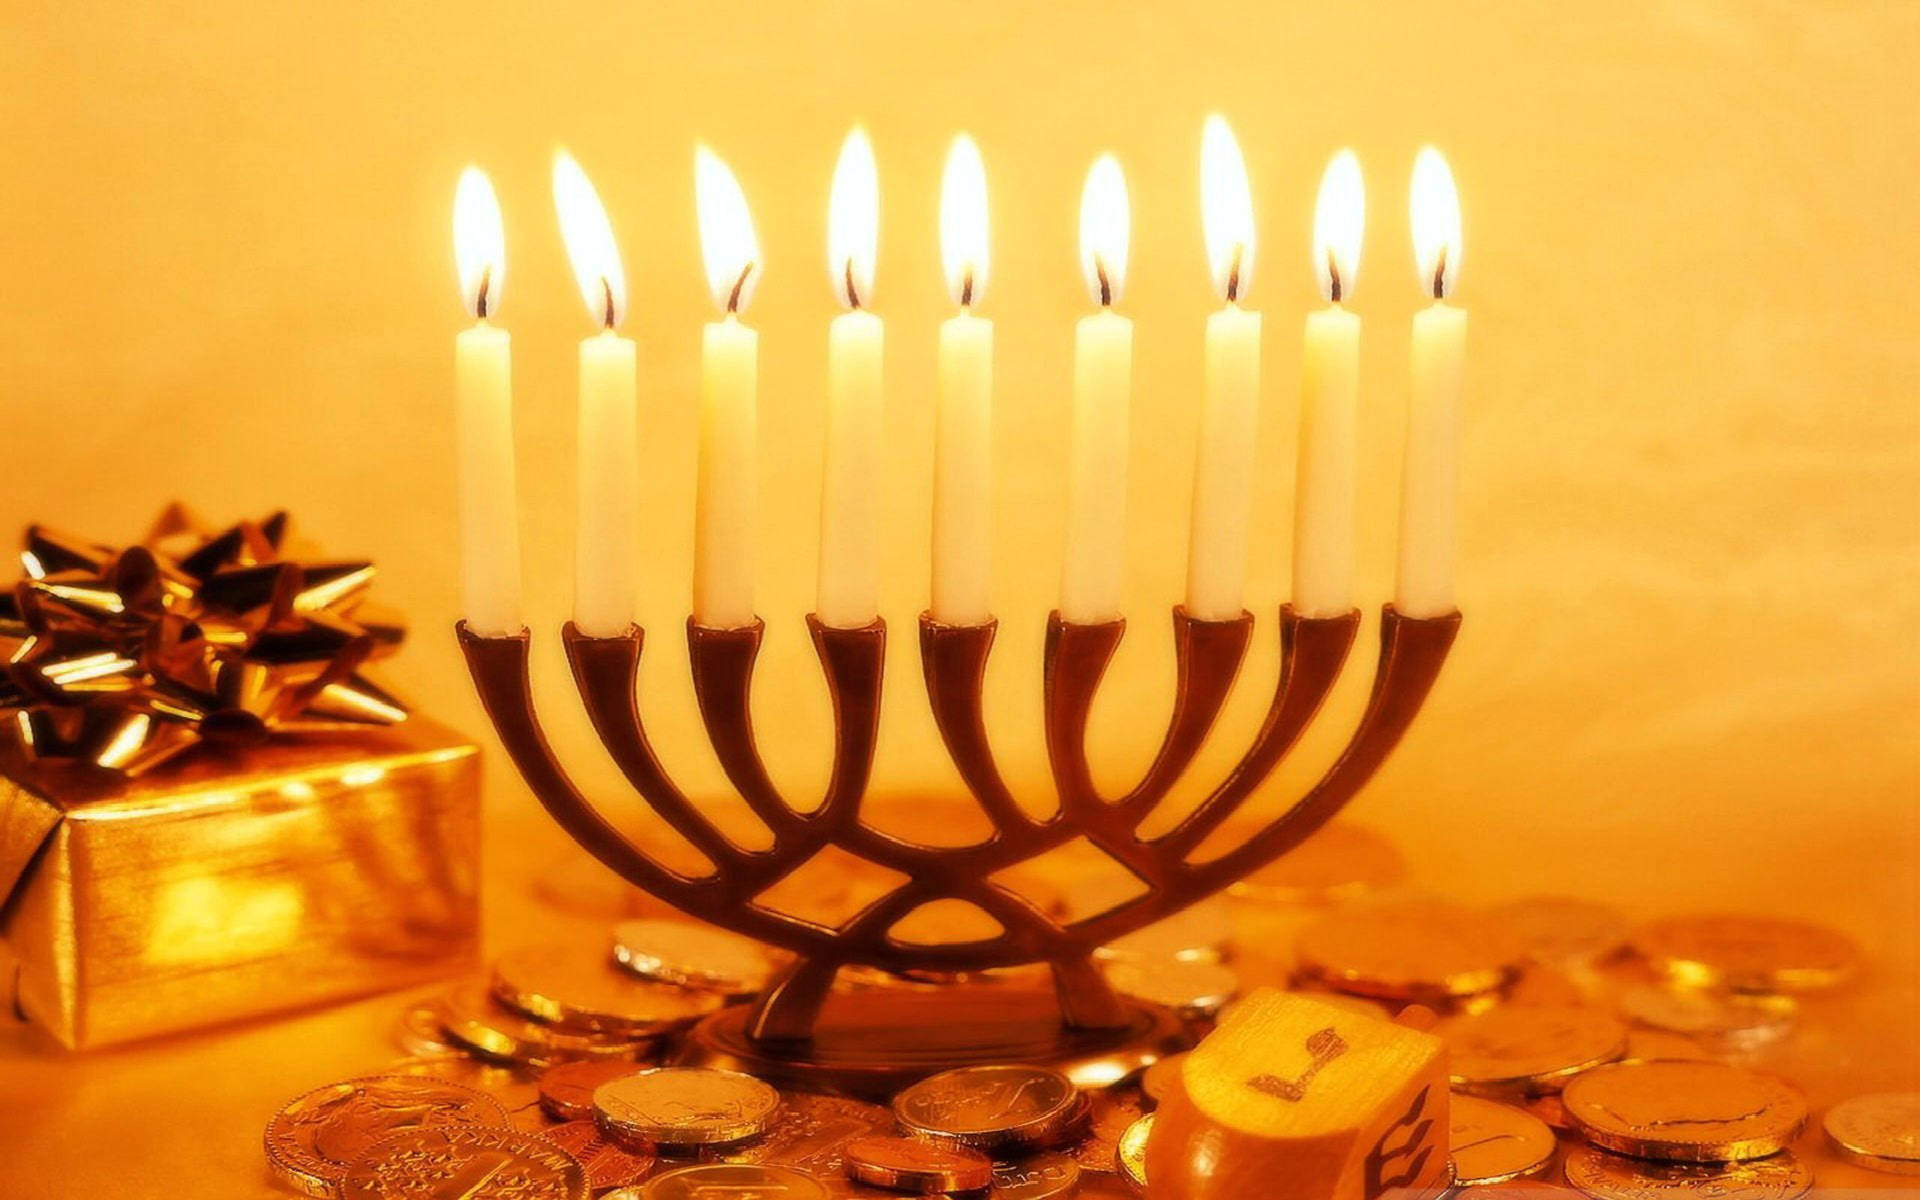 Caption: Illuminating Hanukkah Celebration With Traditional Coins And Candles Background